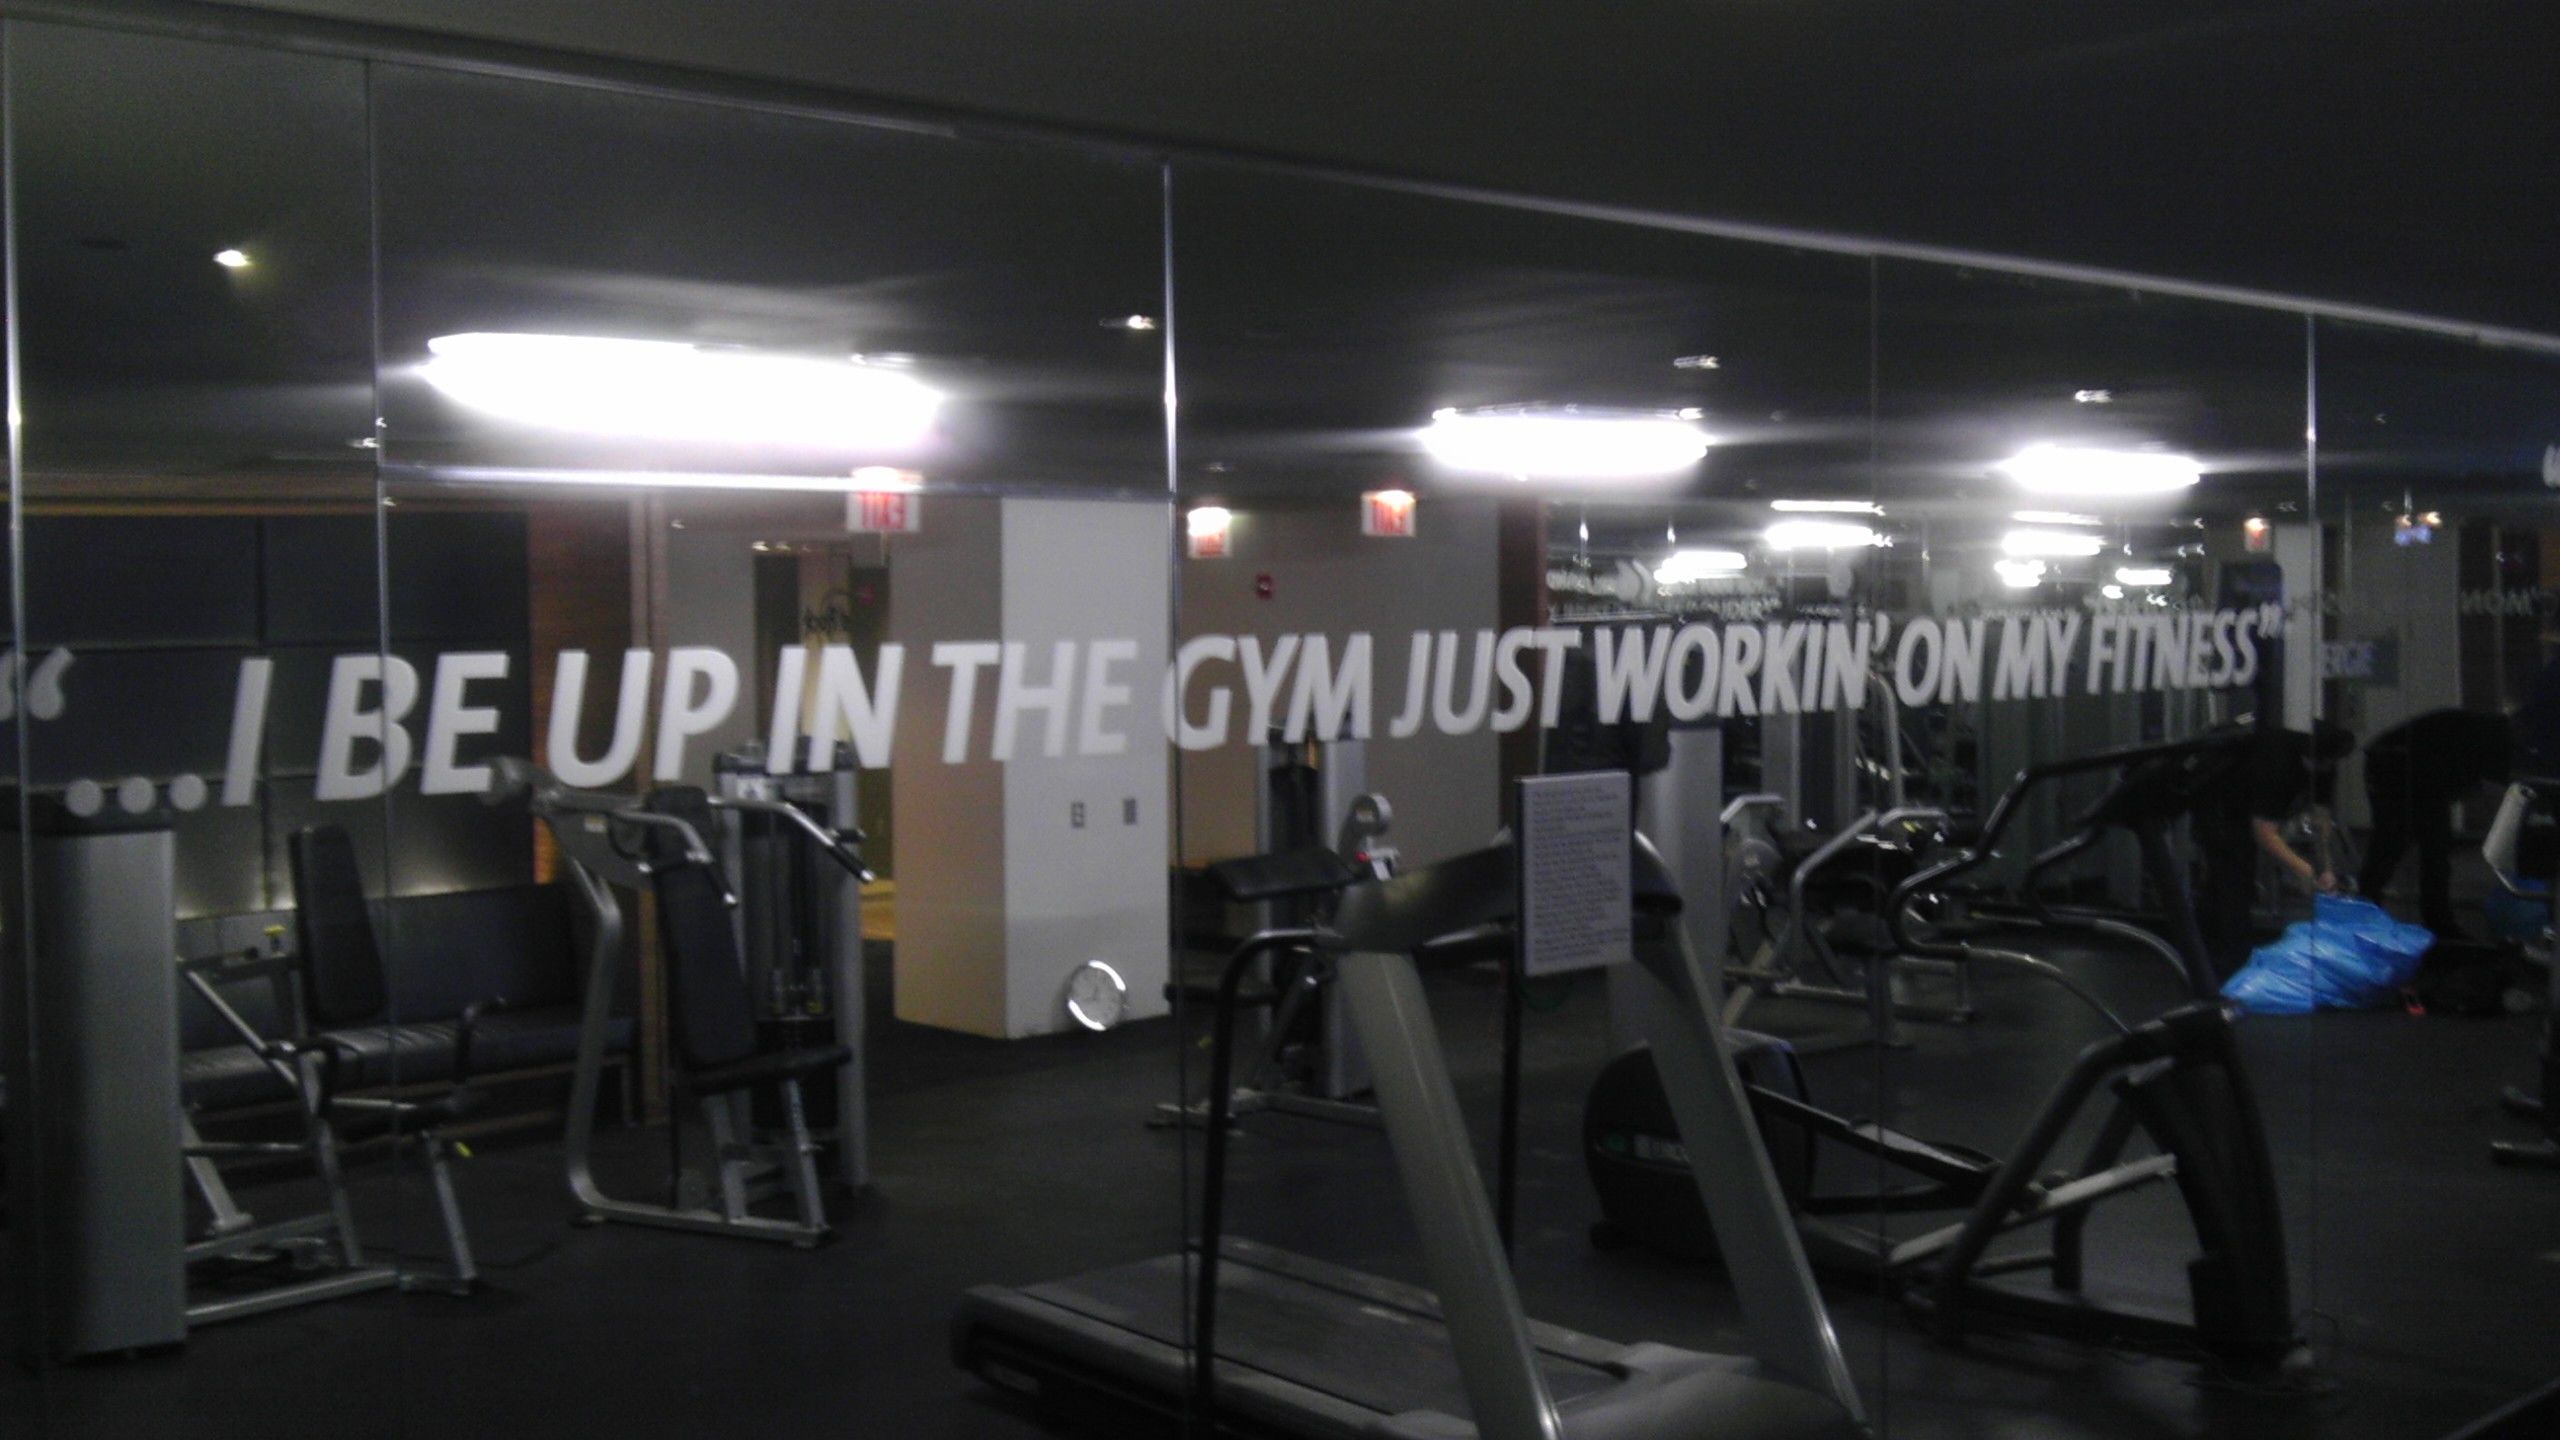 Lettering on mirrors for Hard Rock Hotel's gym